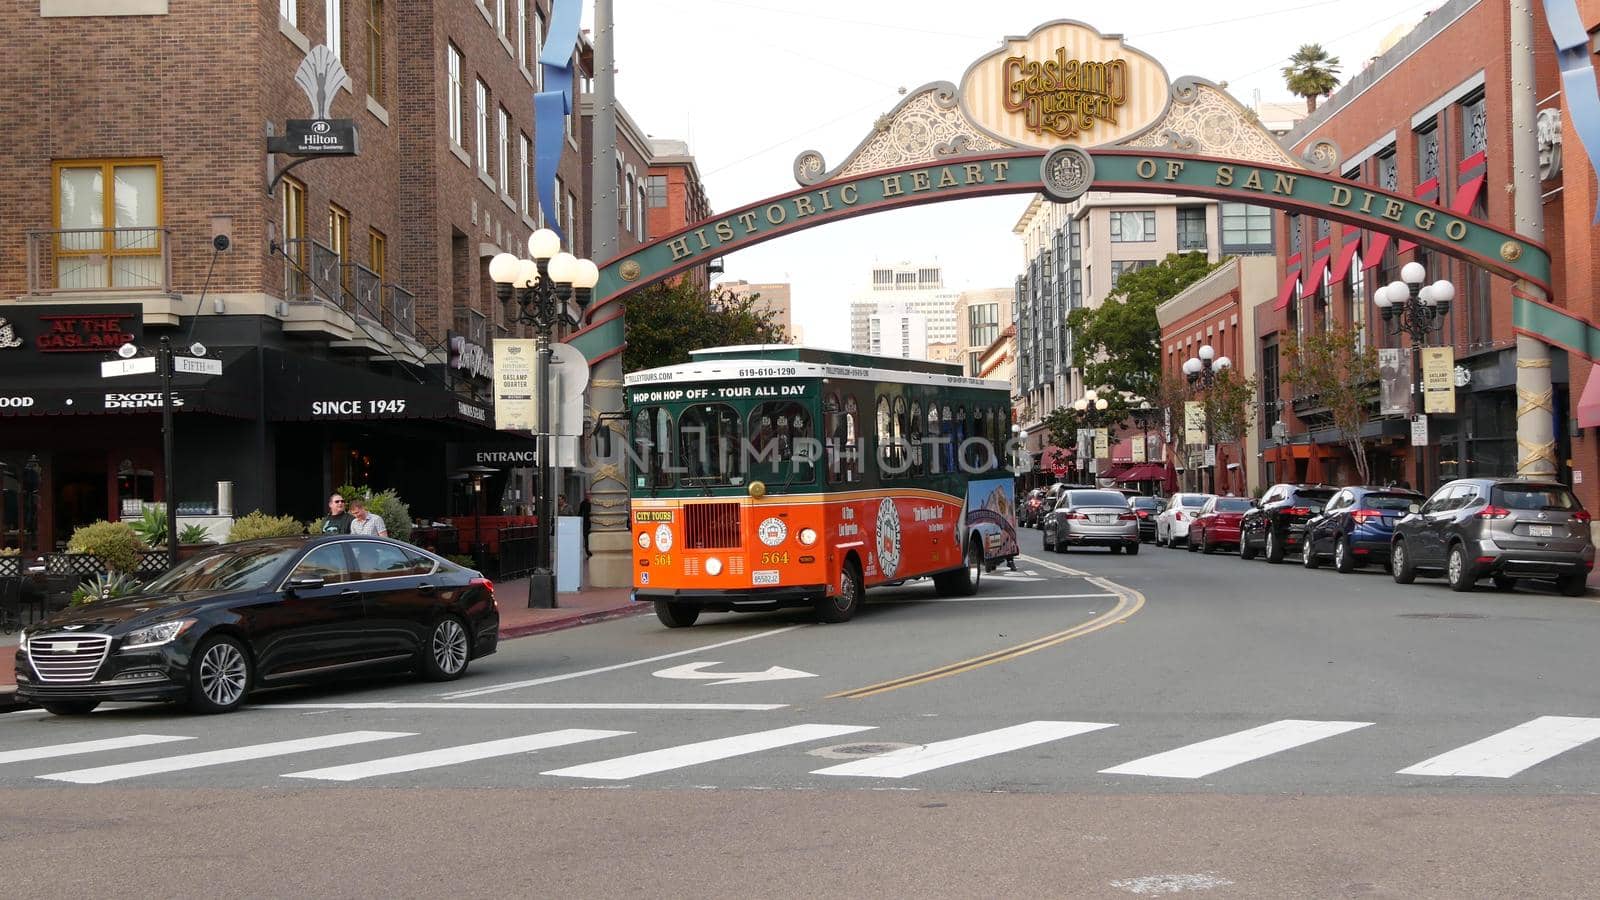 SAN DIEGO, CALIFORNIA USA - 30 JAN 2020: Gaslamp Quarter historic entrance arch sign on 5th avenue. Orange iconic retro trolley, hop-on hop-off bus and tourist landmark, Old Town Sightseeing Tour by DogoraSun